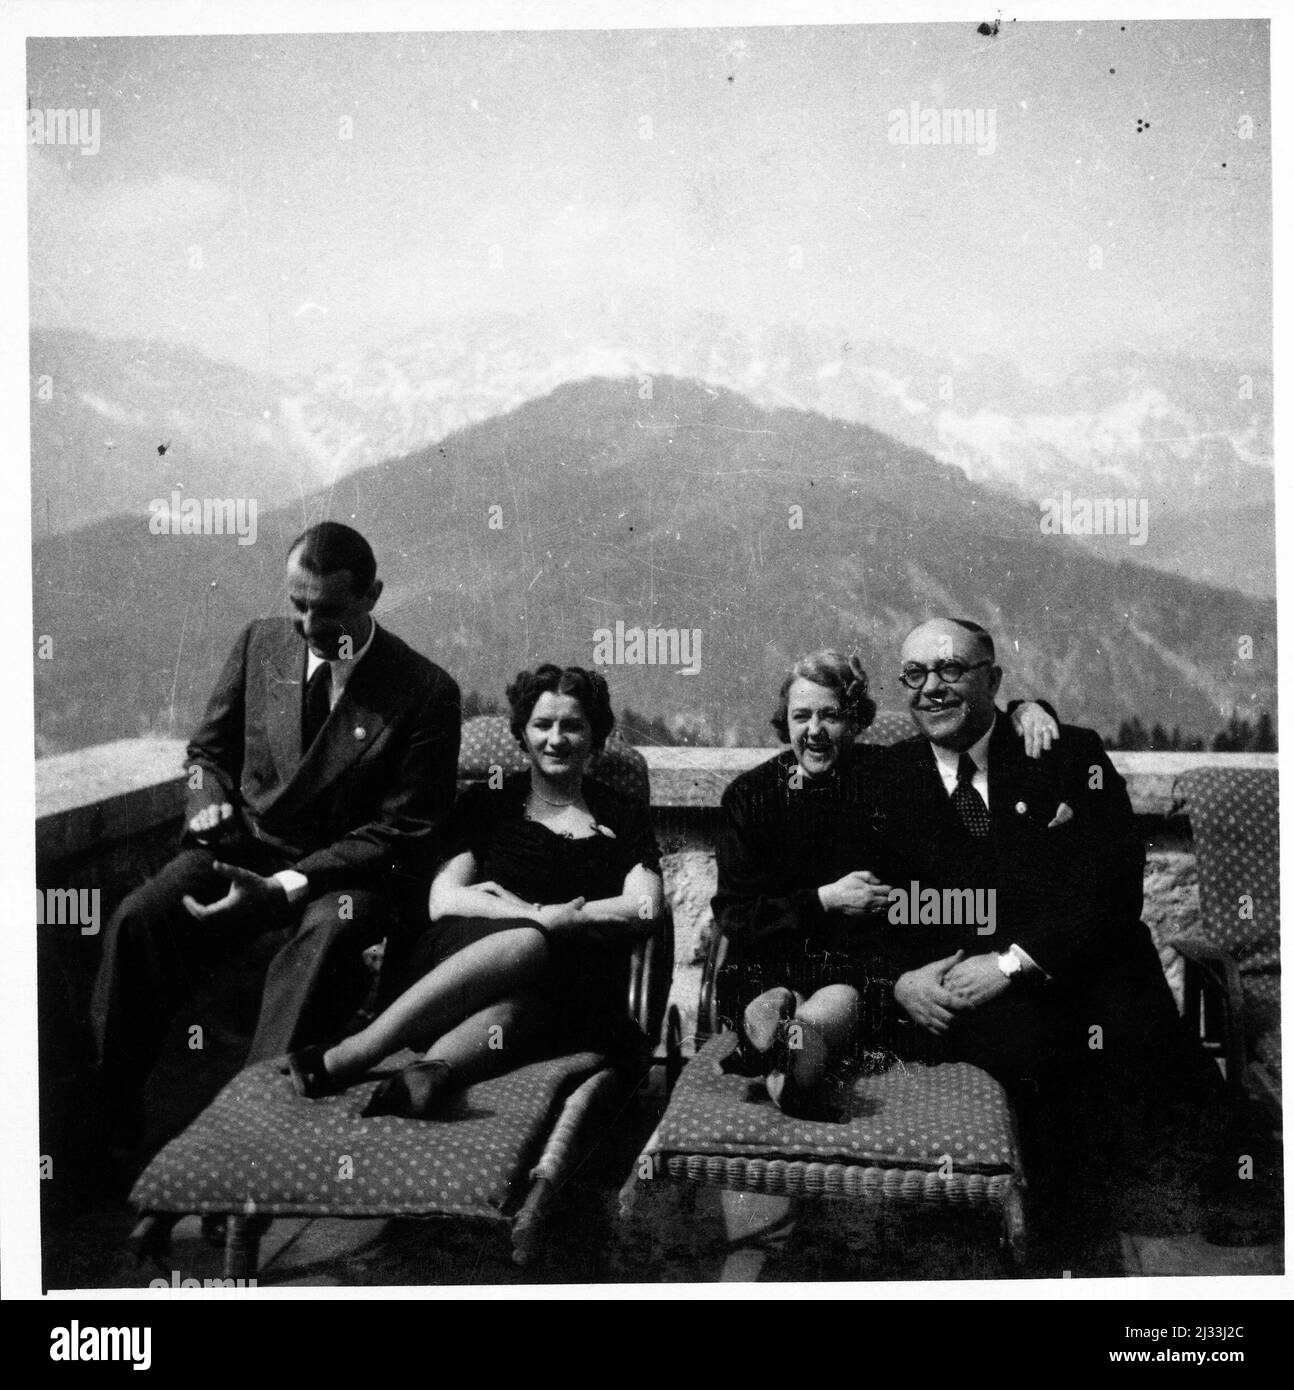 Pfingsten, Berghof., Berchtesgaden, Germany. Eva Braun's Photo Albums, ca. 1913 - ca. 1944. These albums are attributed to Eva Braun (four are claimed by her friend Herta Schneider, nee Ostermeyer) and document her life from ca. 1913 to 1944. There are many photographs of Eva, her sisters and their children, Herta Schneider and her children, as well as photographs of Eva's vacations, family members and friends. Included also are photographs taken by and of Eva Braun at Hitler's chalet Berghof (or Kehlstein), photographs of Hitler and his entourage, visitors to Berghof and the scenery around Be Stock Photo